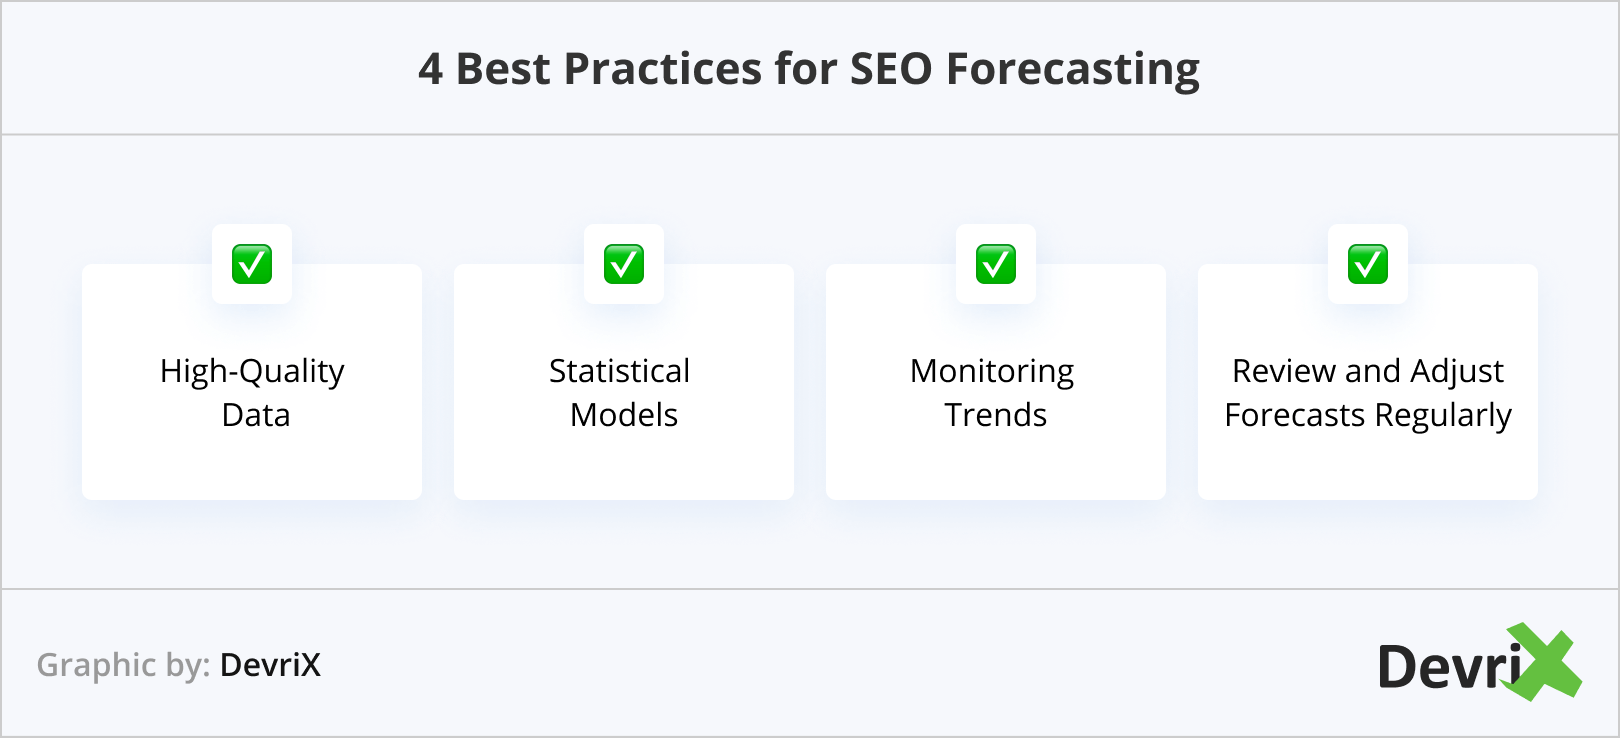 4 Best Practices for SEO Forecasting